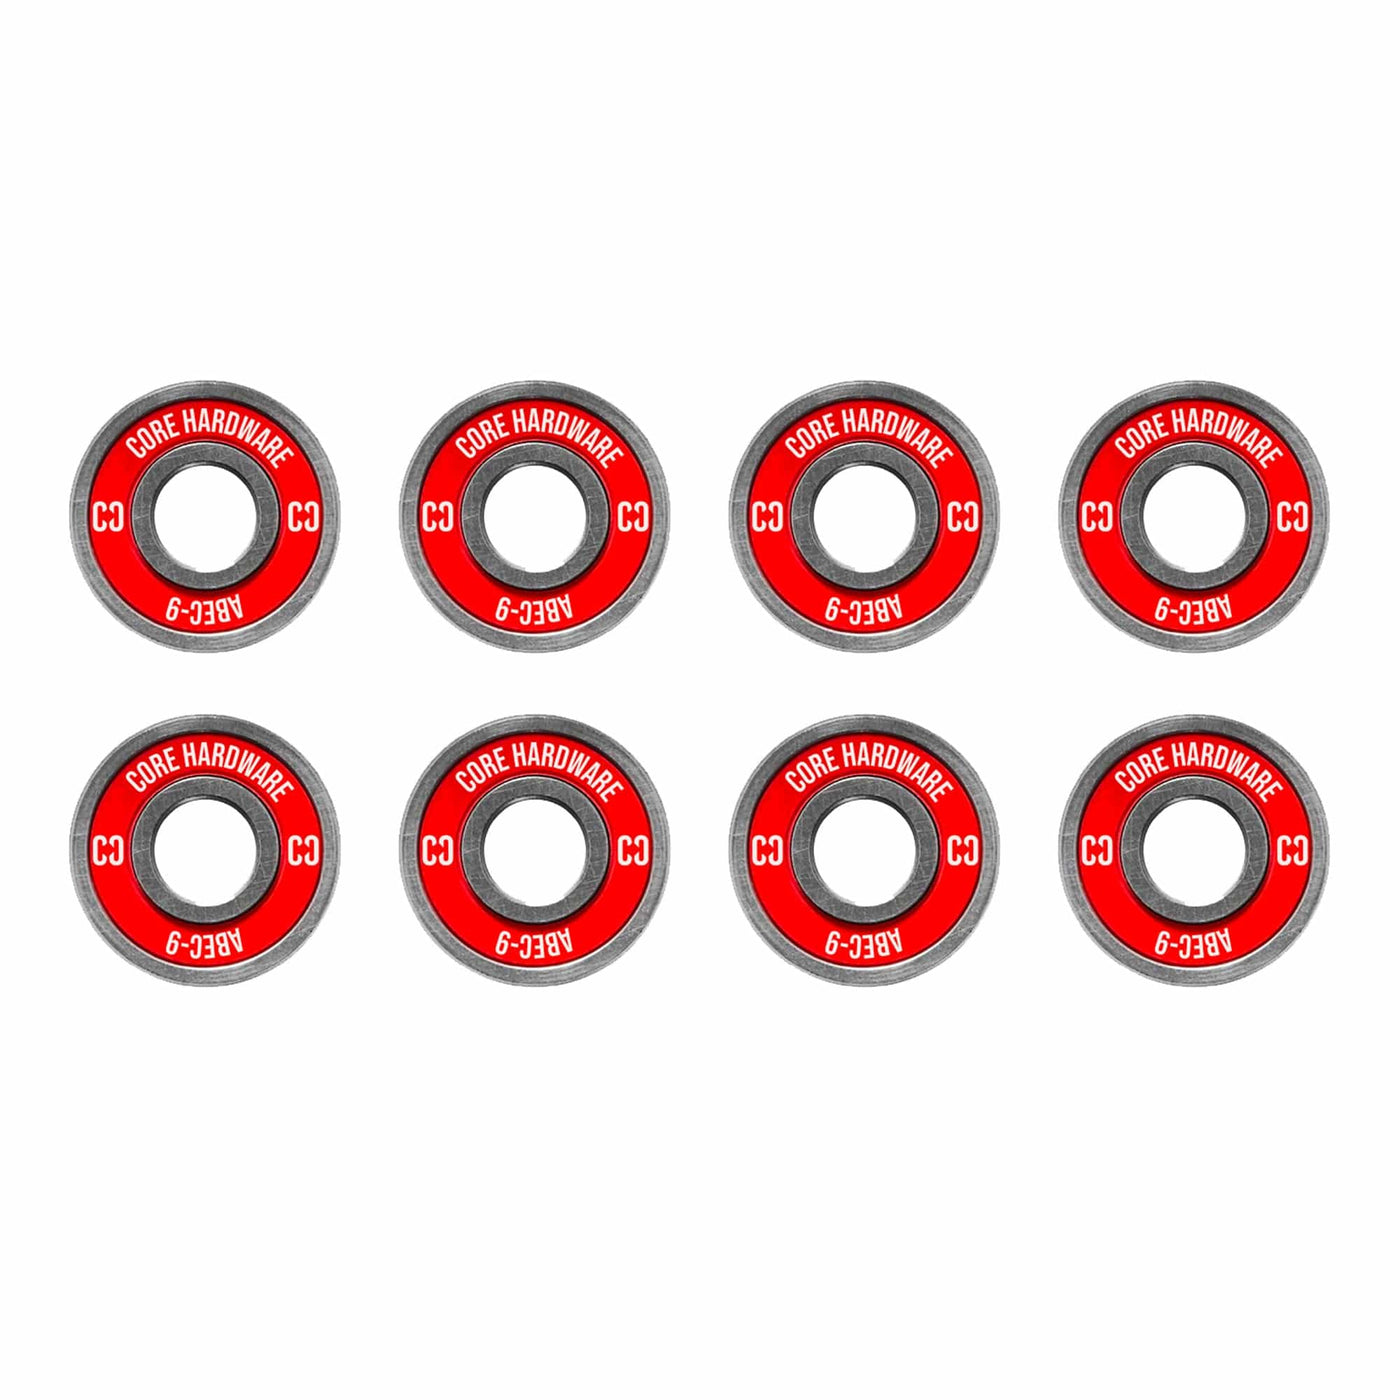 CORE ABEC 9 Skate Bearings Pack of 8 I Skate Board Bearings All Products